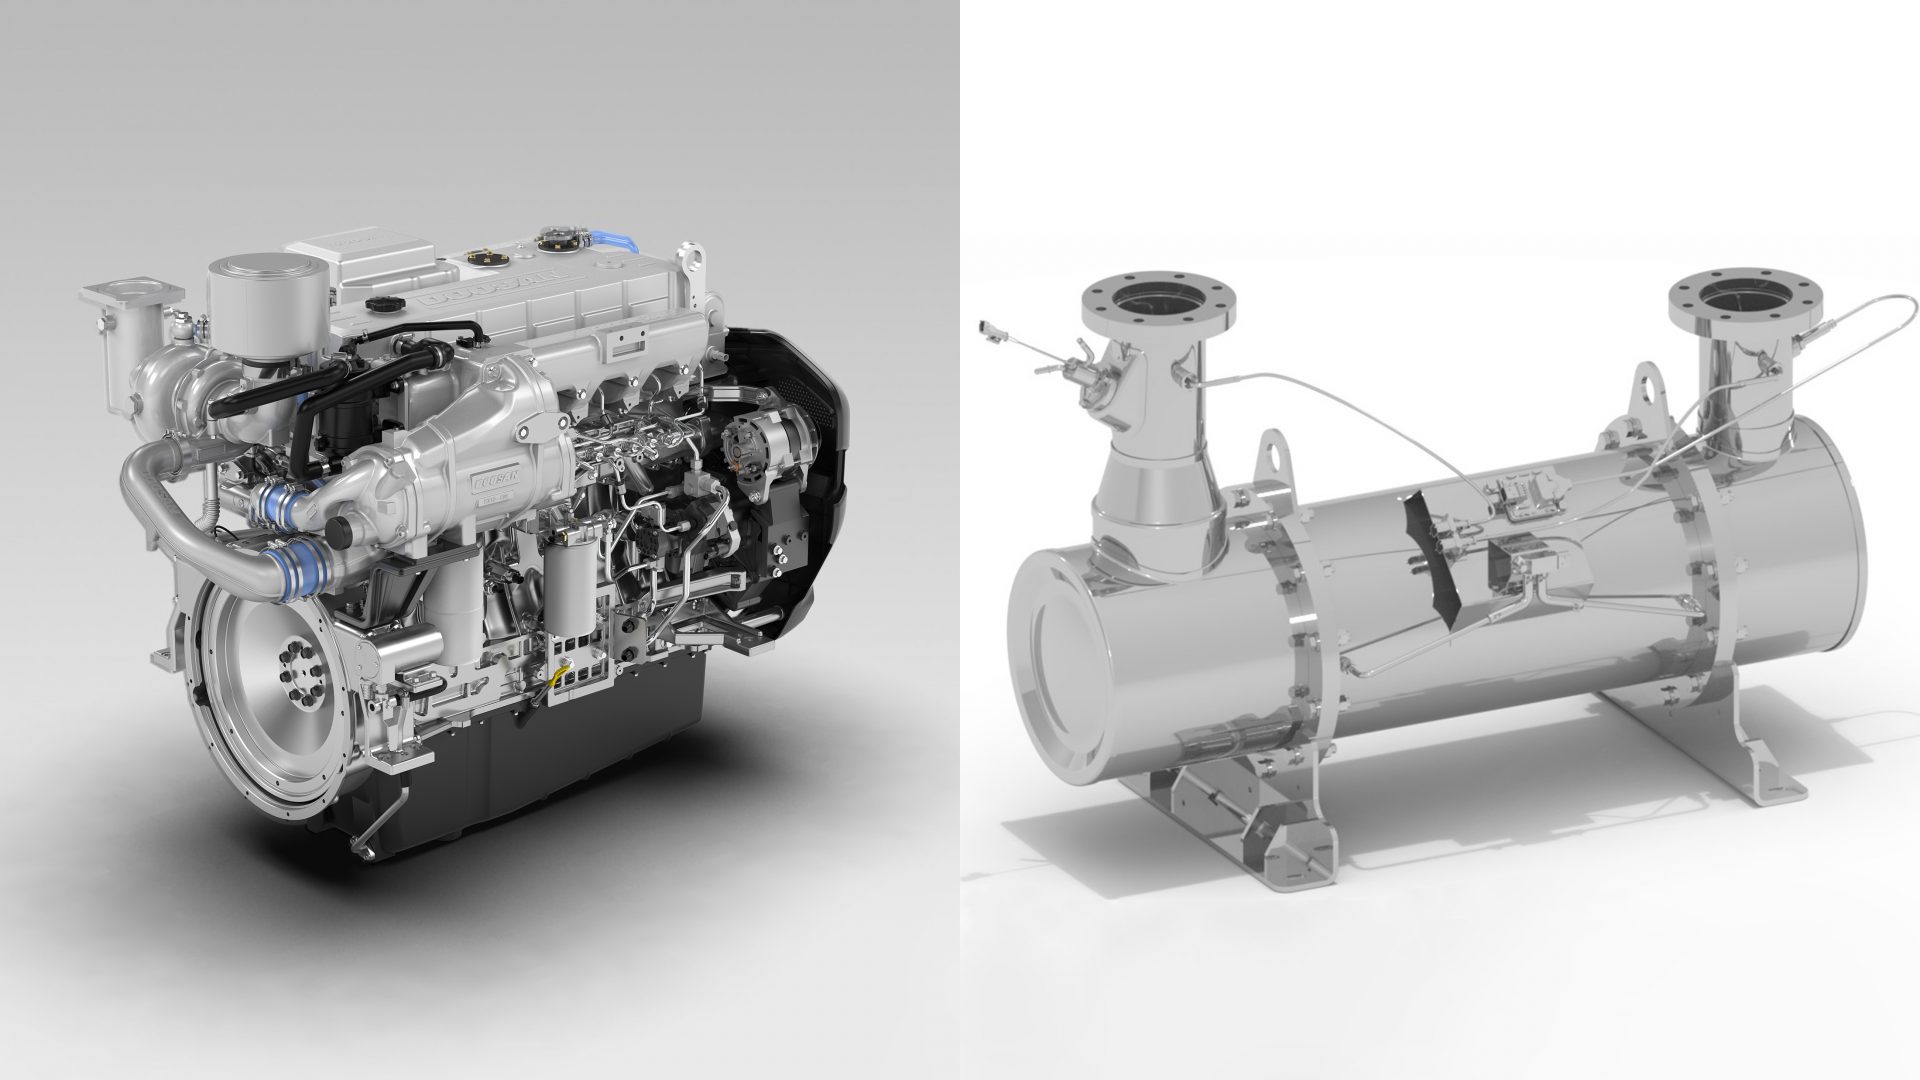 Hyundai Doosan Infracore to supply engines for K2 tanks bound for